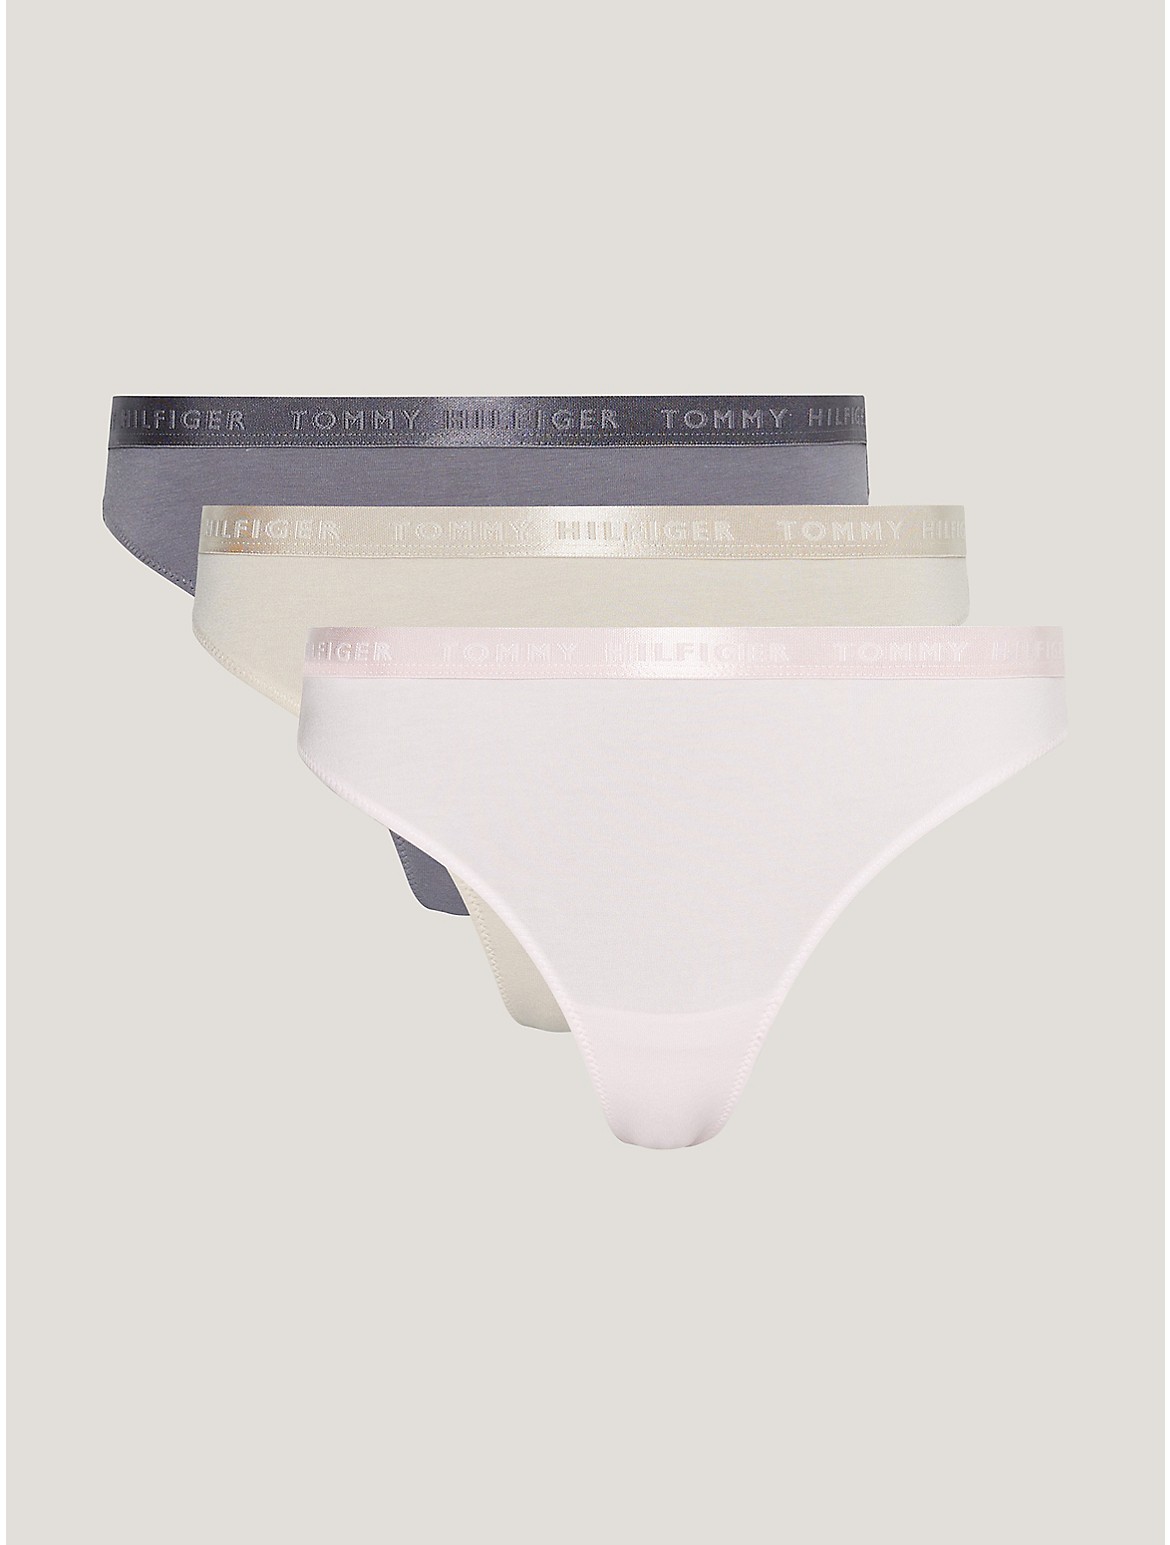 Tommy Hilfiger Women's Everyday Luxe Thong 3-Pack